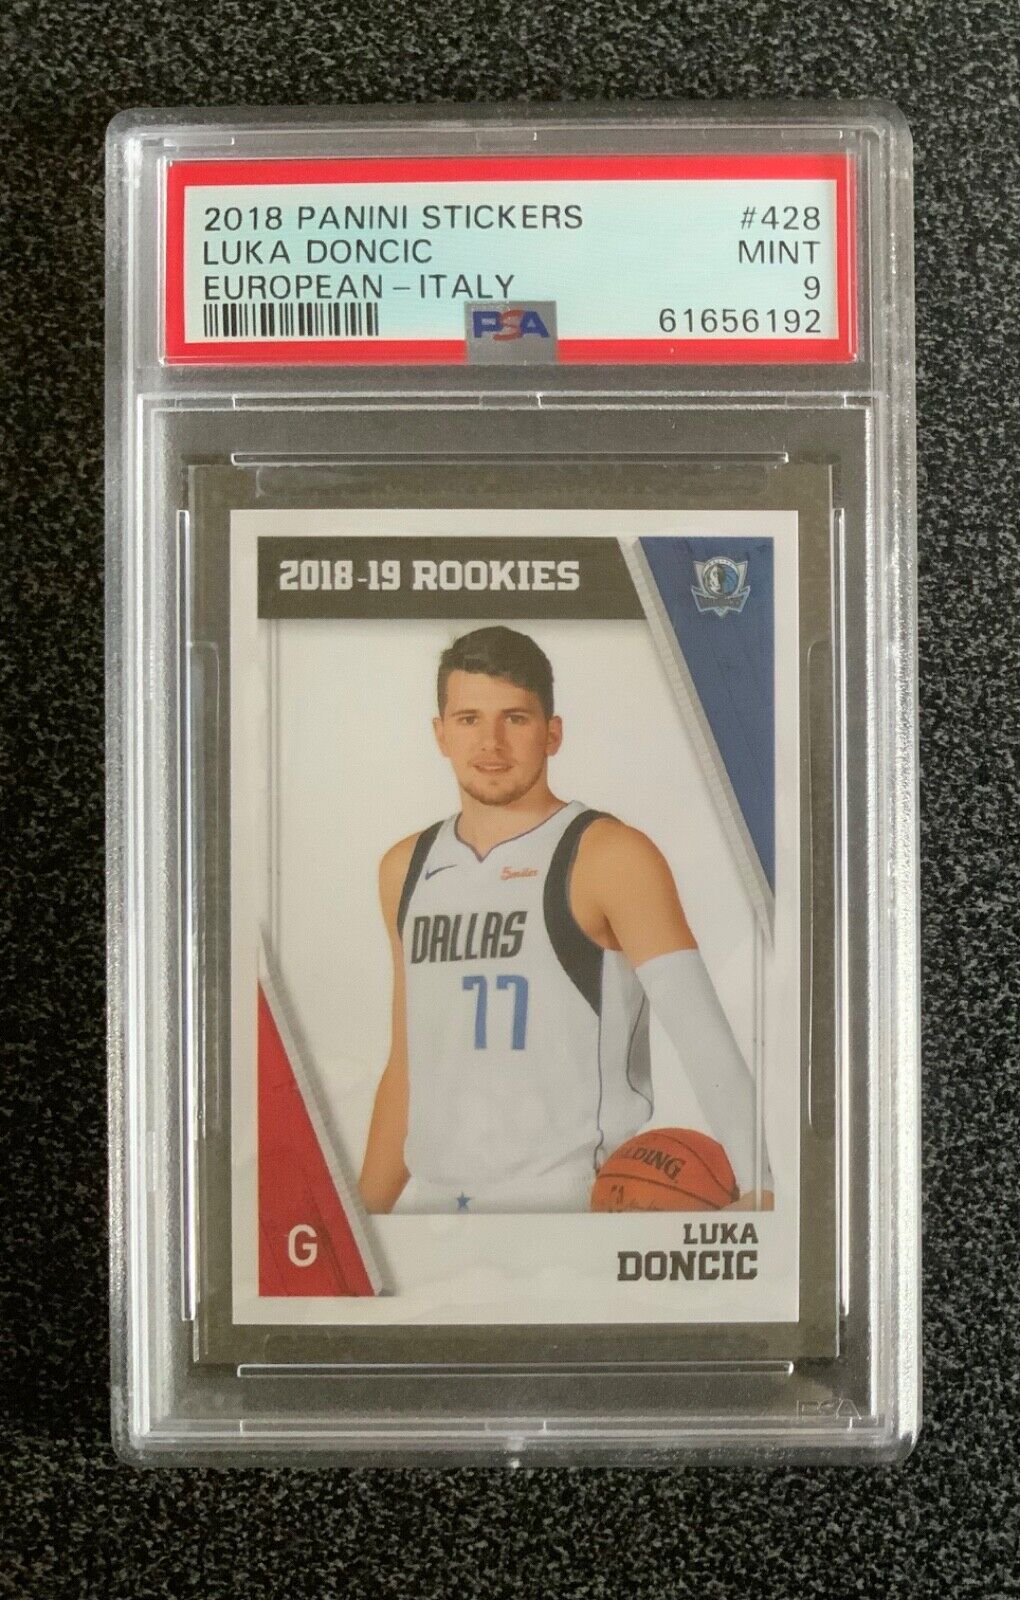 2018-2019 Panini Stickers Luka Doncic European-Italy #428 PSA MINT 9 RC ROOKIE